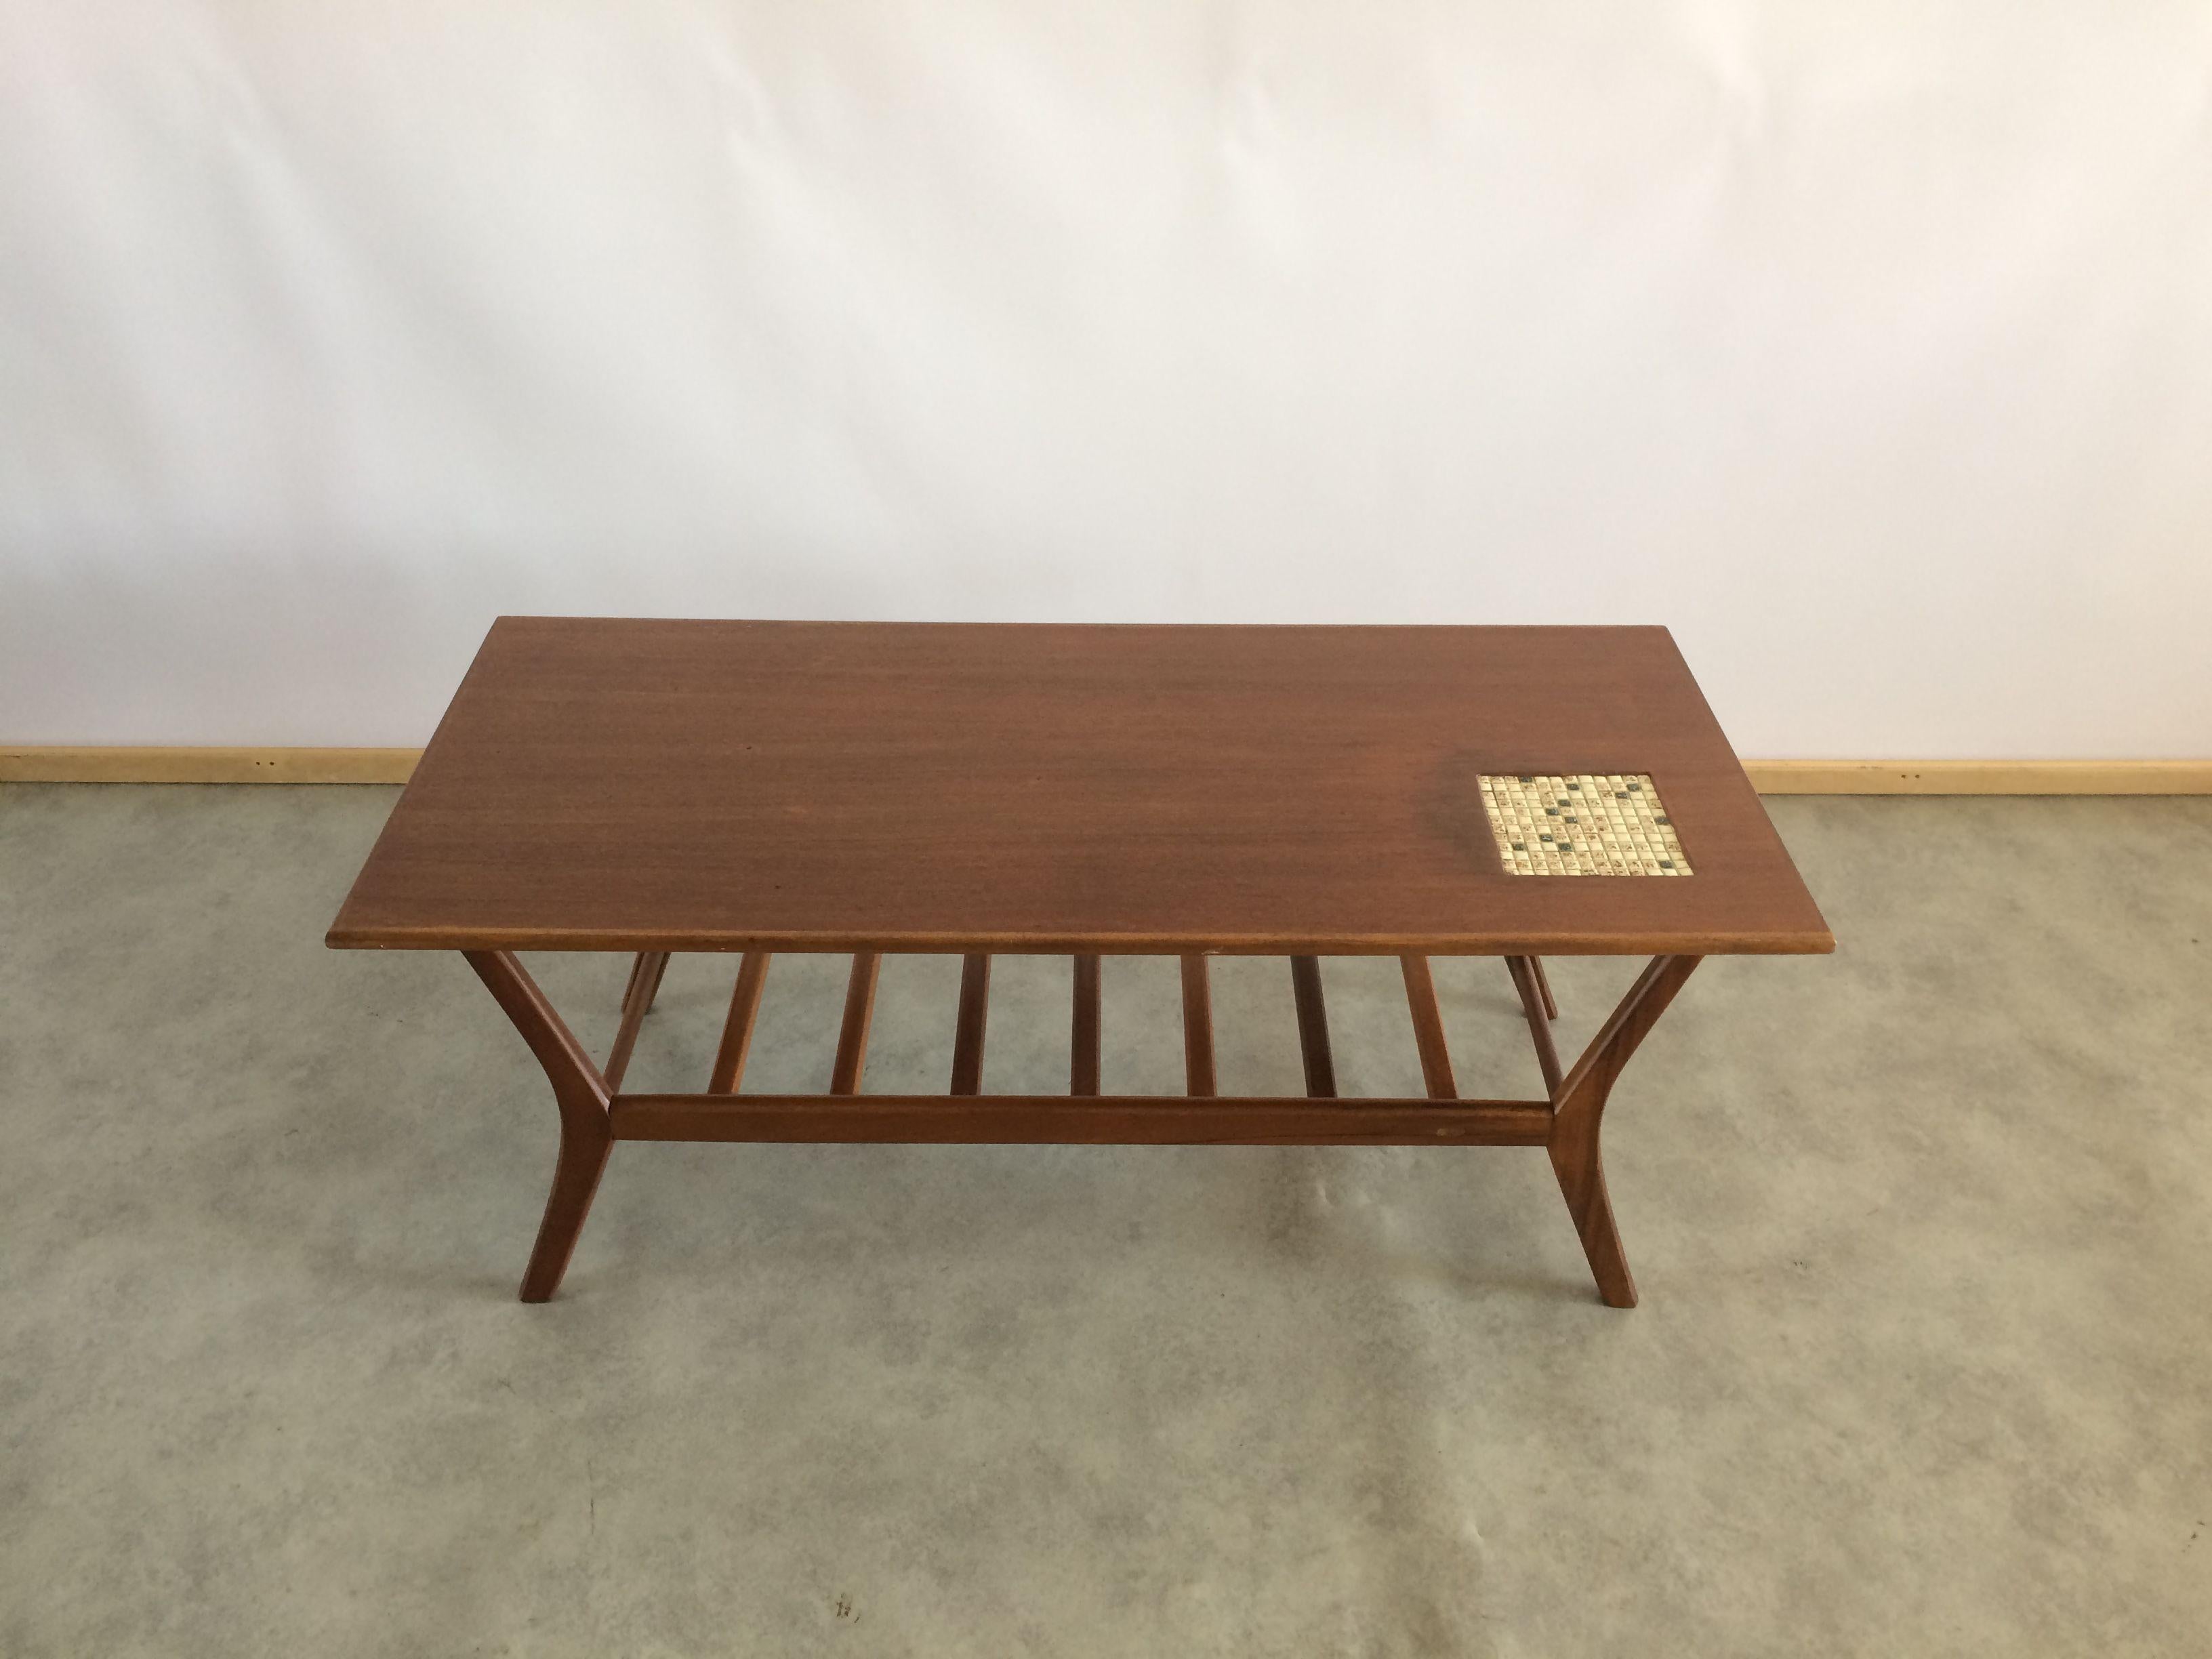 Teak coffee table by Louis Van Teeffelen for Wébé in 1960. Tray decorated with a mosaic. Magazine rack under the tray. Restored and in good condition. The furniture still has some nice patina which shows that it came from the 60's.